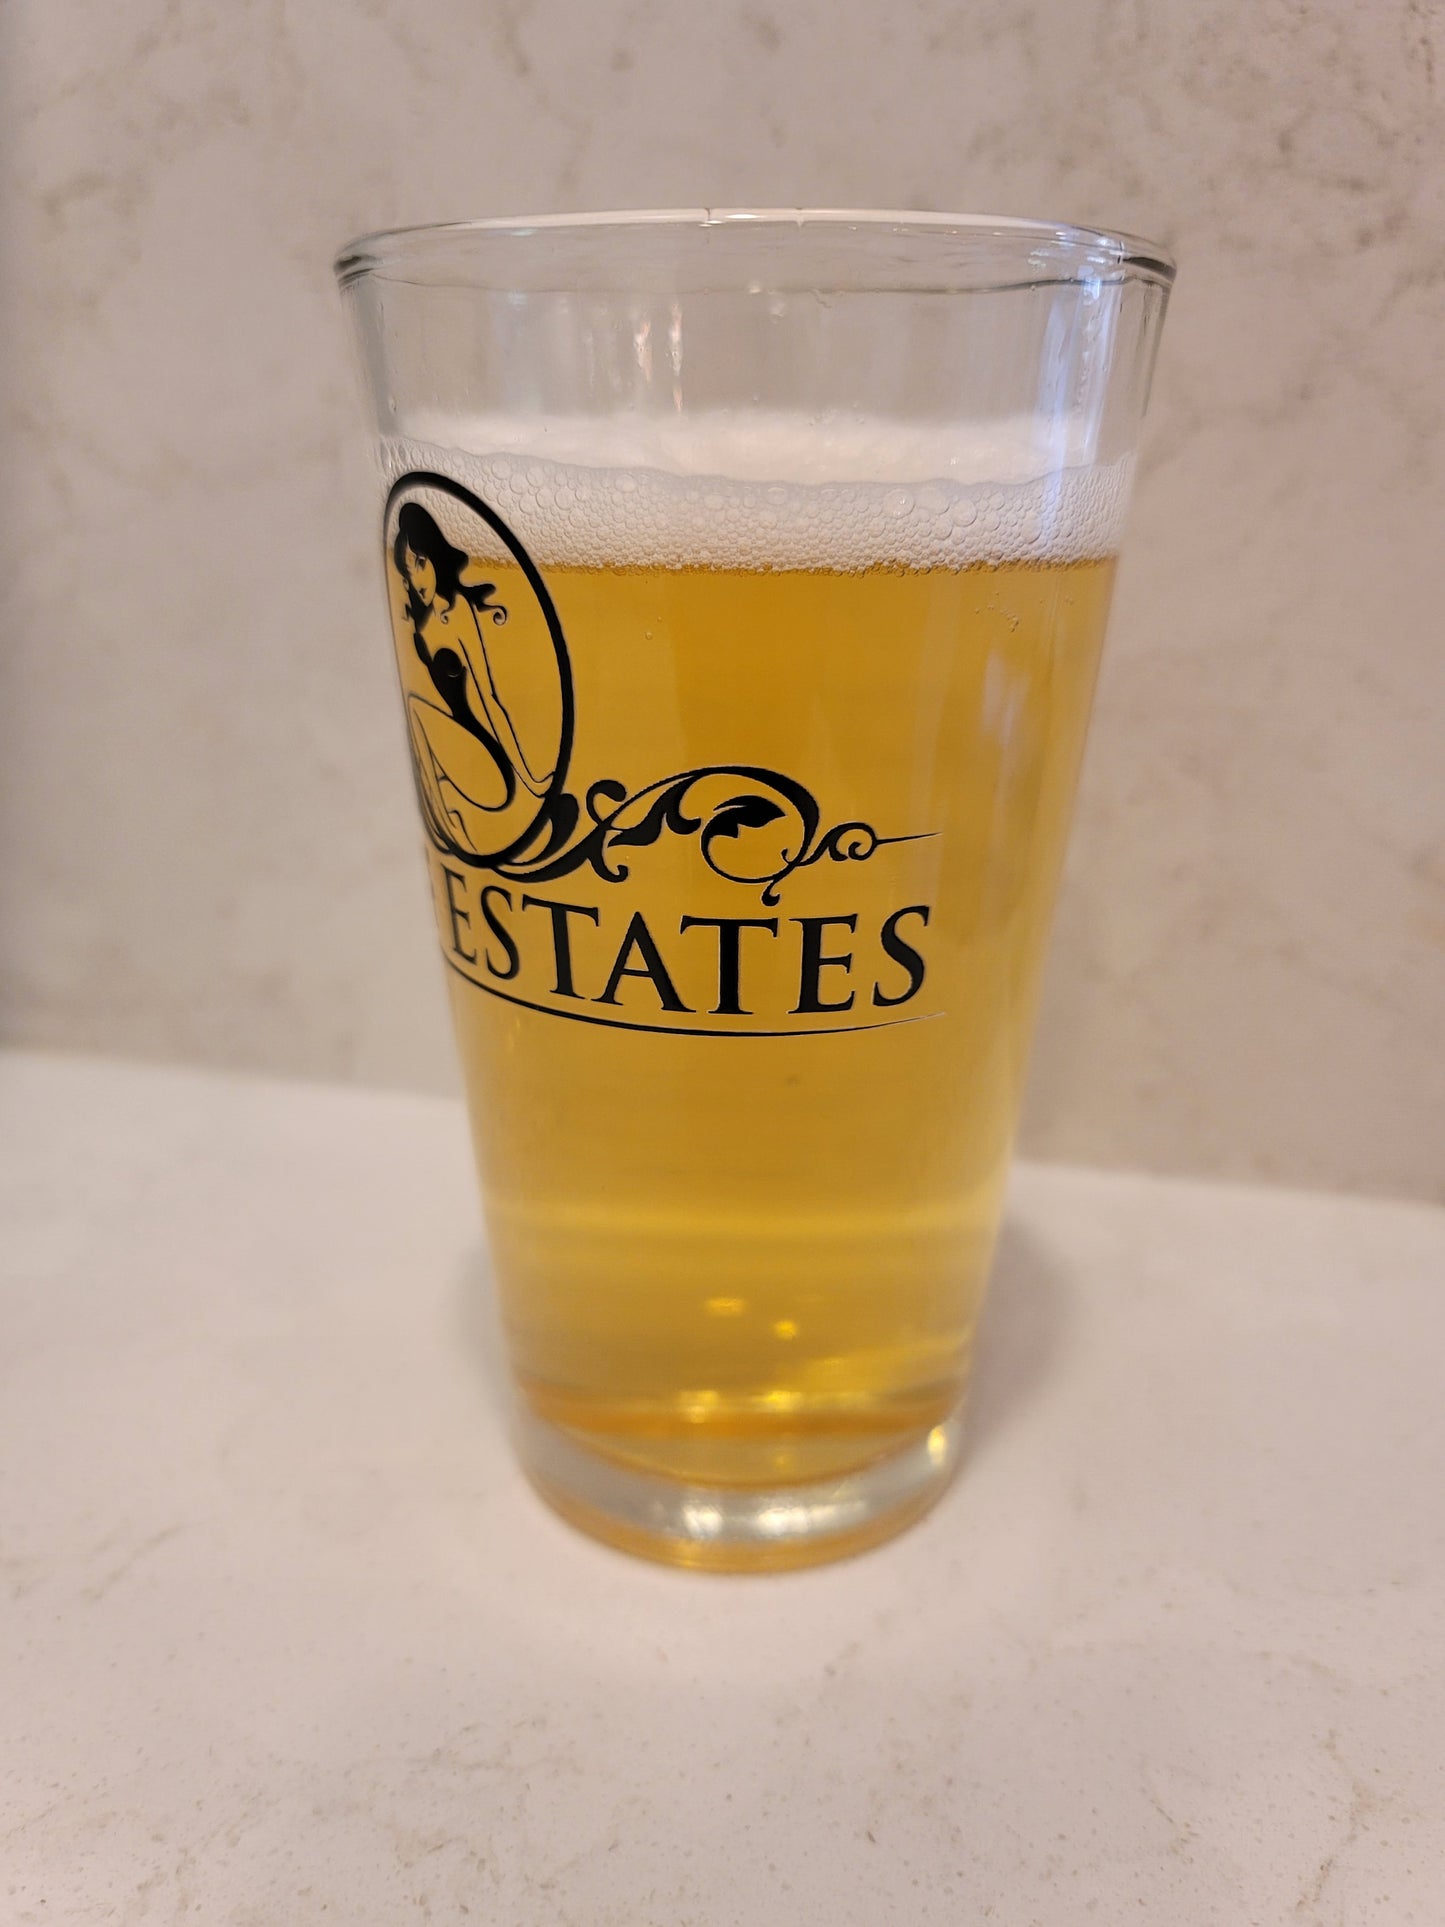 MILF ESTATES Pint Glass   "Limited Quantities- Special Order Now"